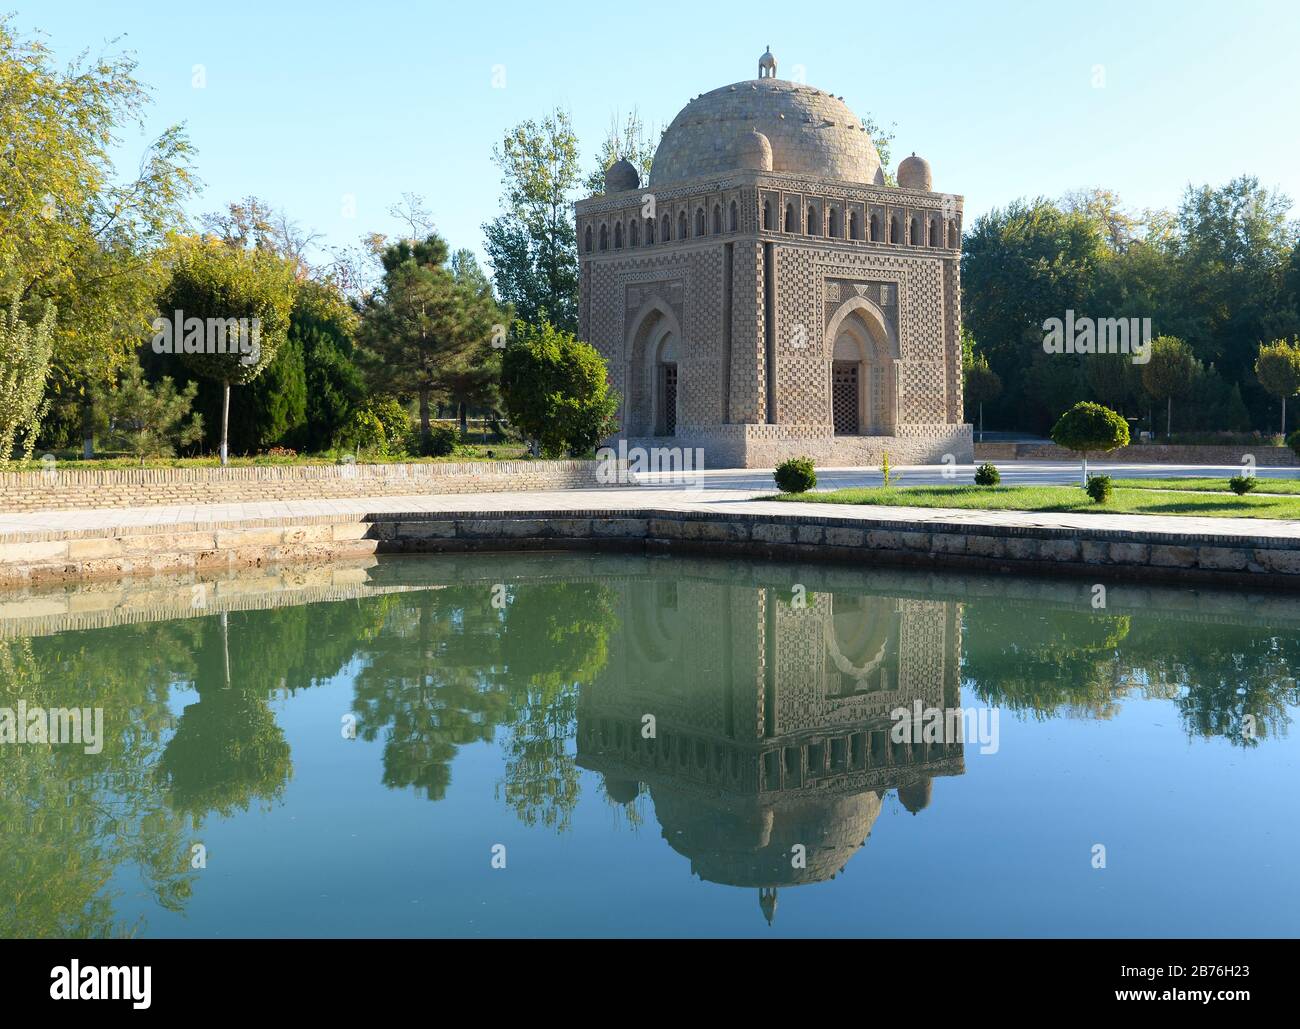 Samanid Mausoleum reflecting in the water in a park with vegetation in Bukhara, Uzbekistan. Iconic example of the early Islamic architecture in Asia. Stock Photo